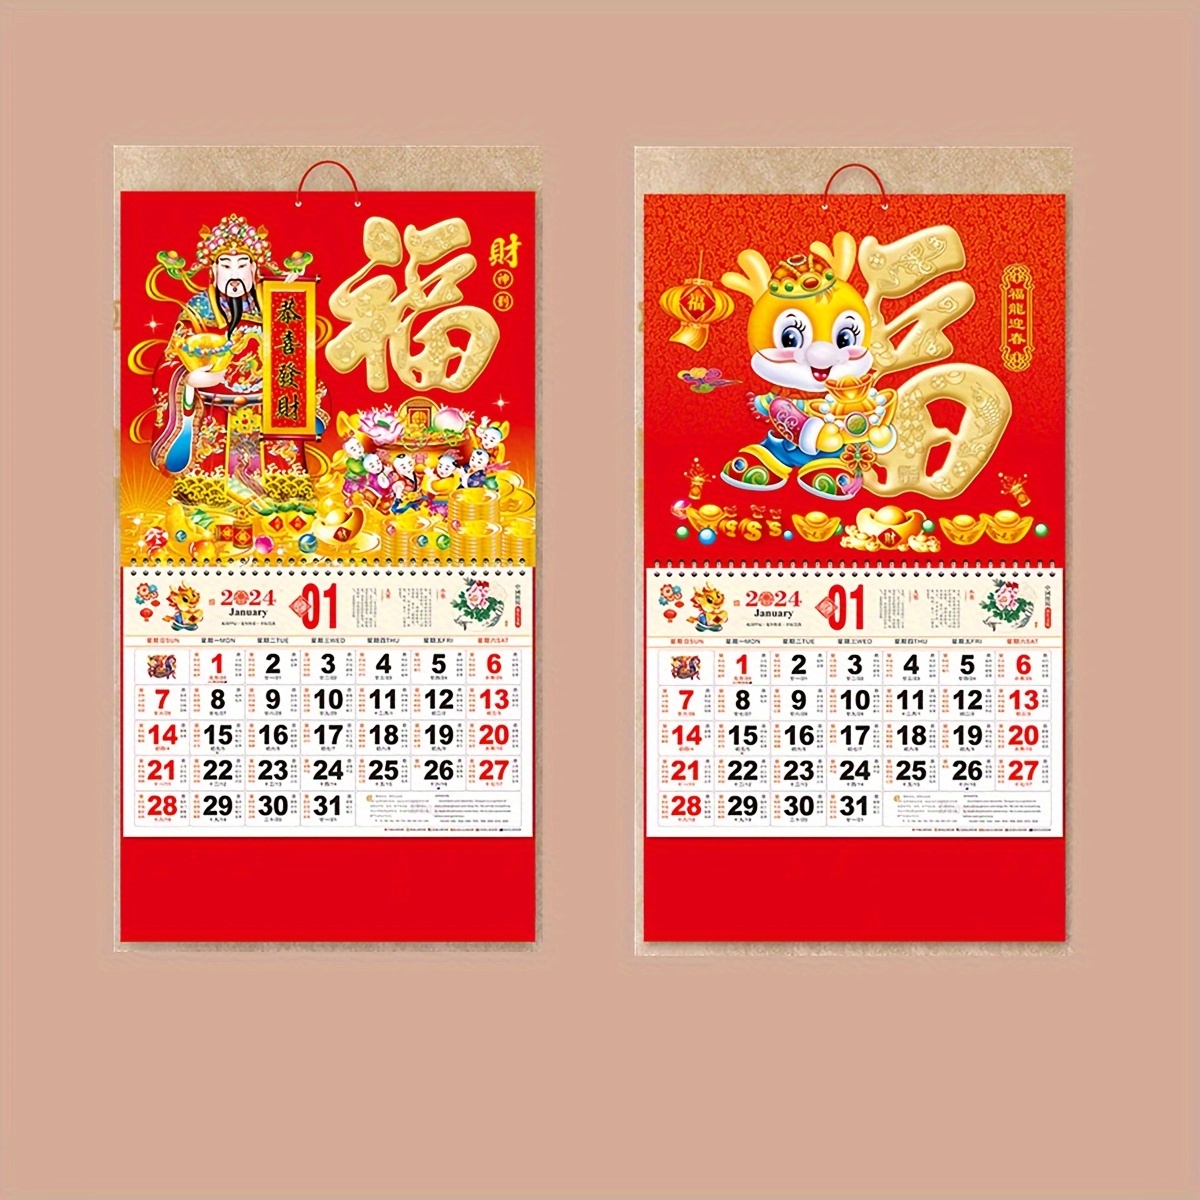 Calendrier mural chinois 2024 Calendrier lunaire Calendrier mural décoratif  Calendrier suspendu ménager